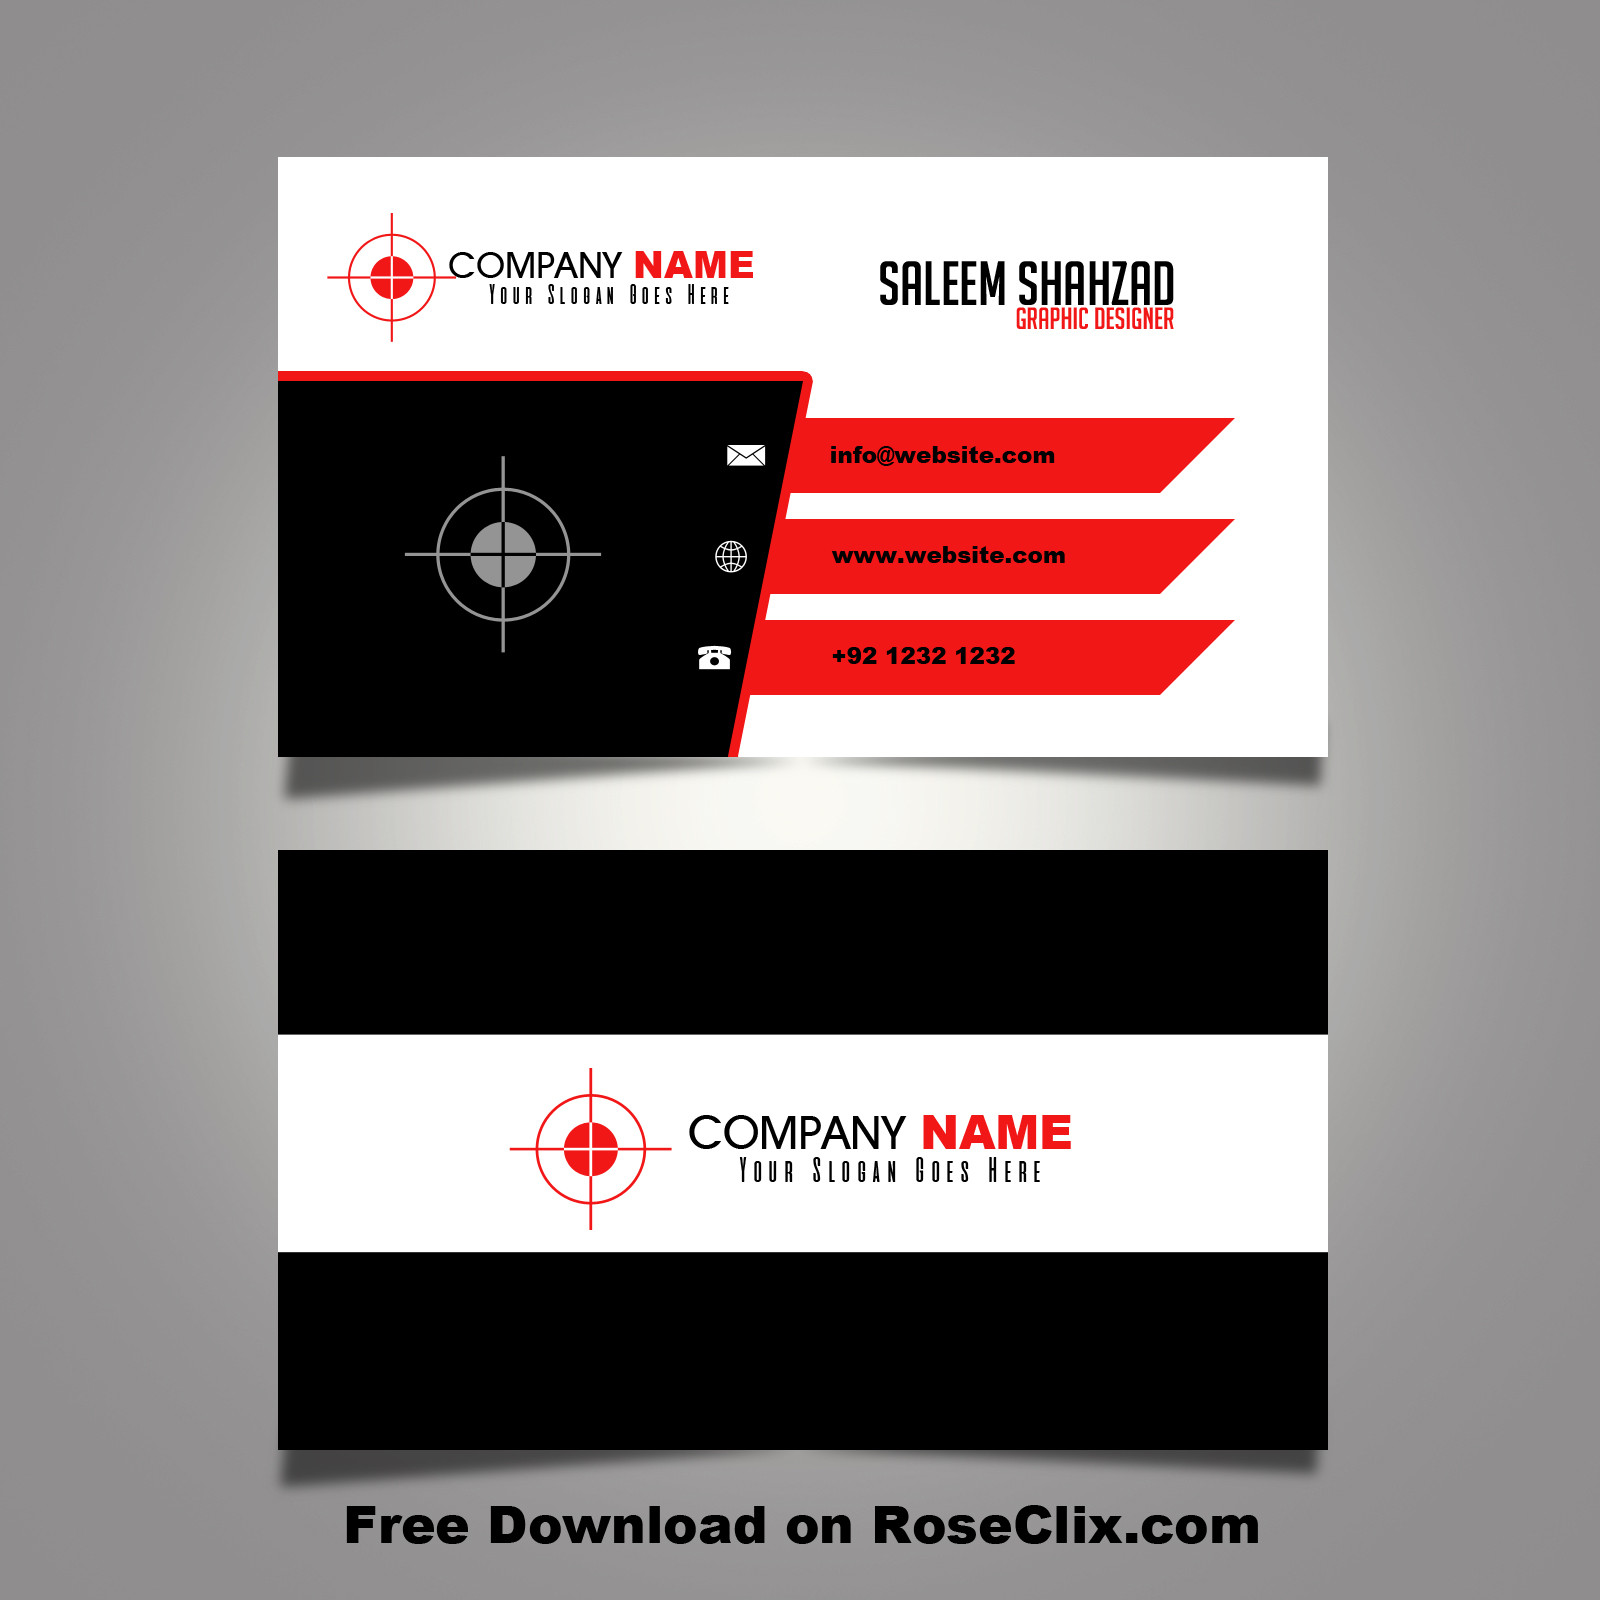 002 245 Gall E00cb9 Template Ideas Free Downloads Of Free Psd Business Cards Templates